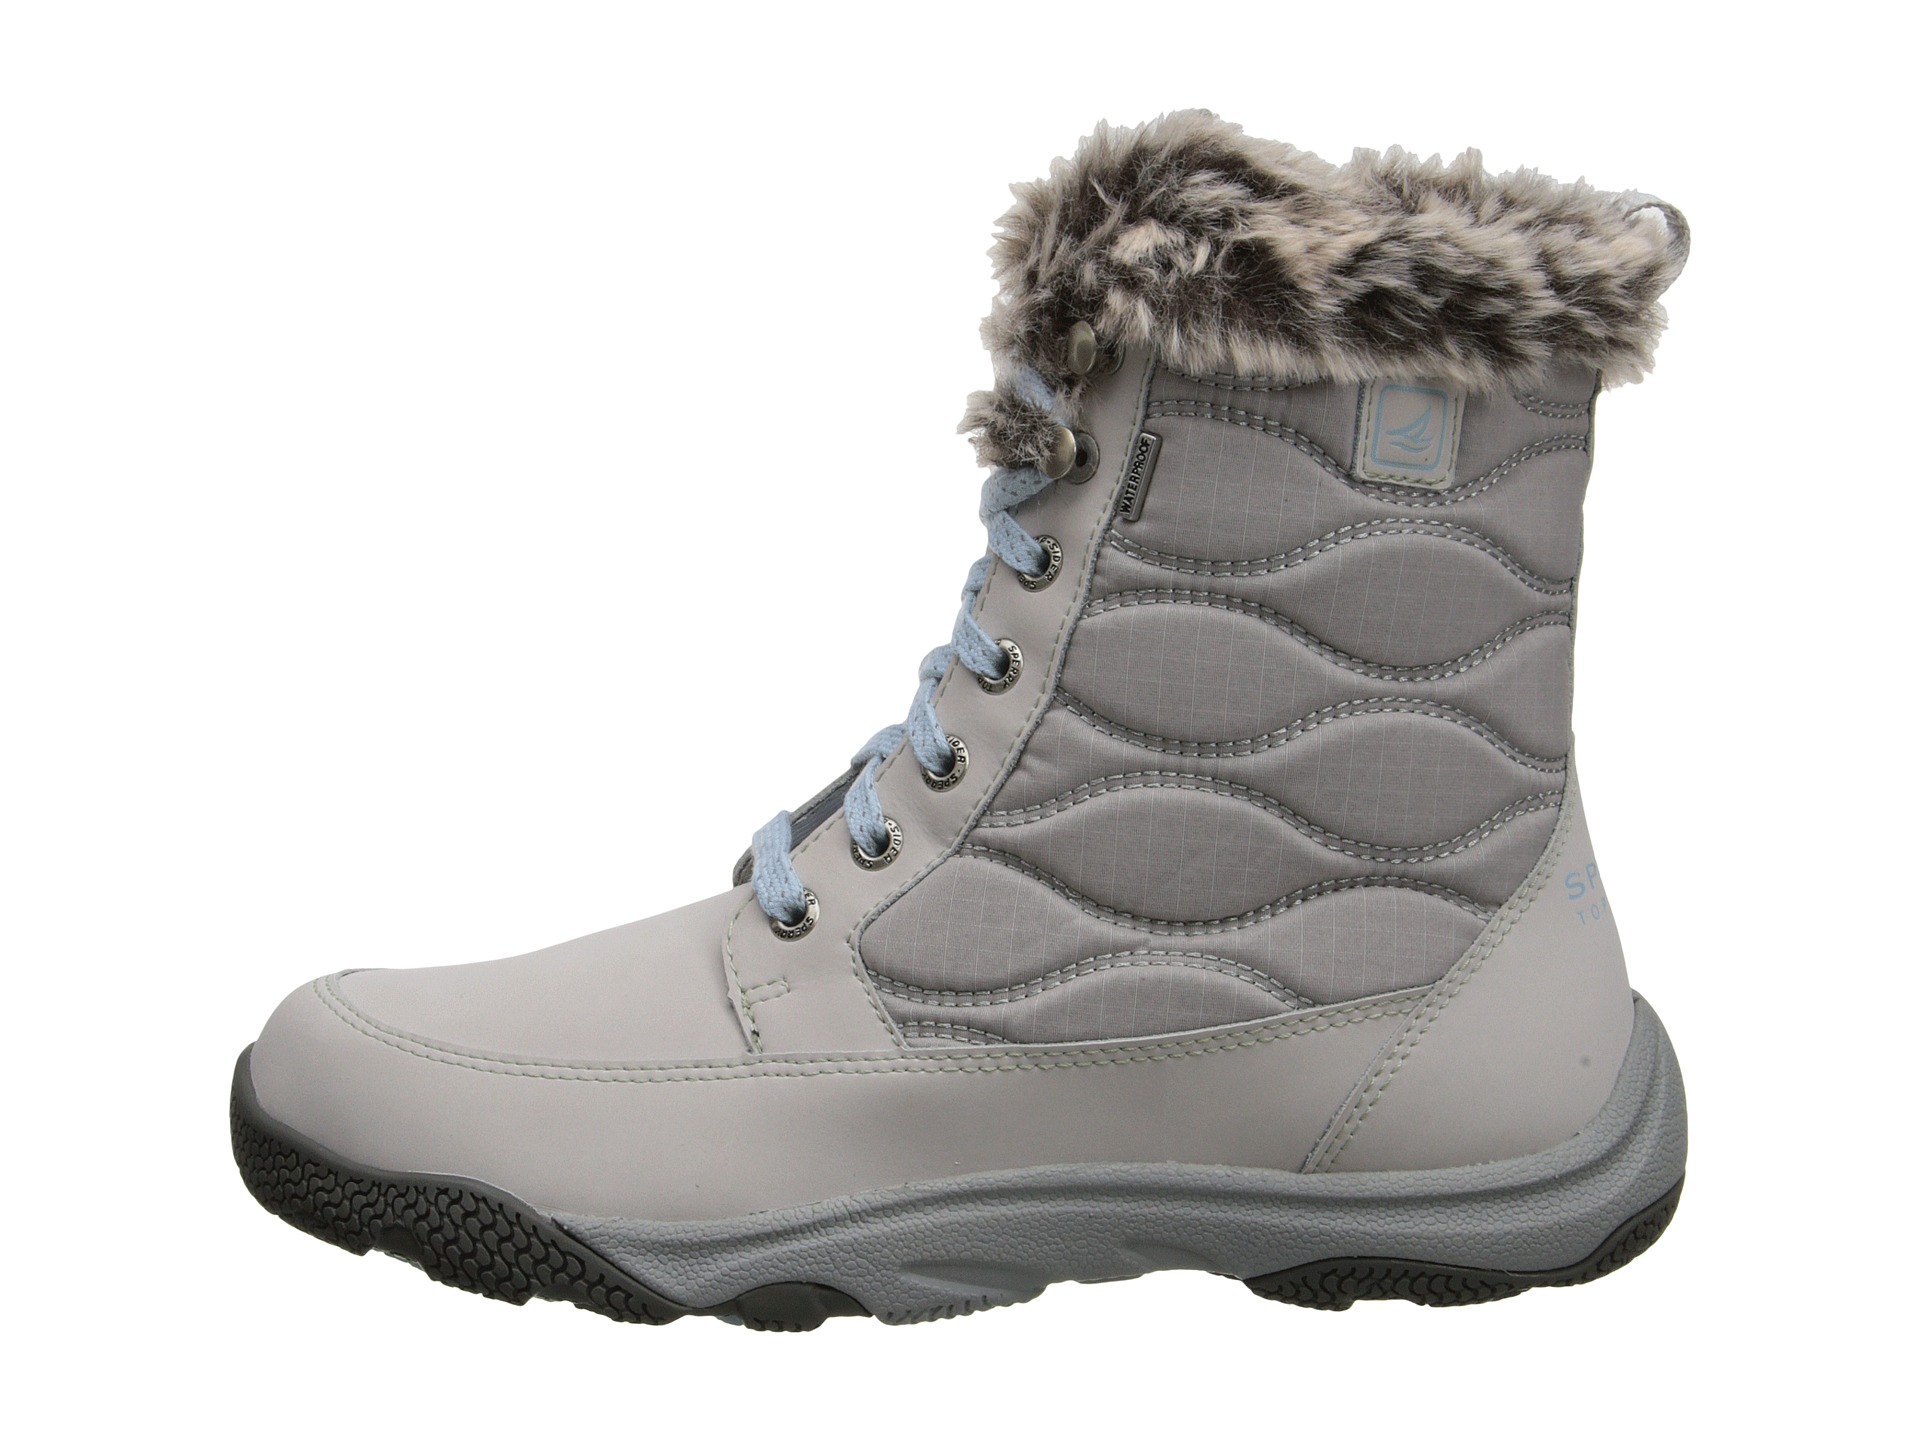 Sperry Top Sider Winter Cove Boot Light Grey | Shipped Free at Zappos